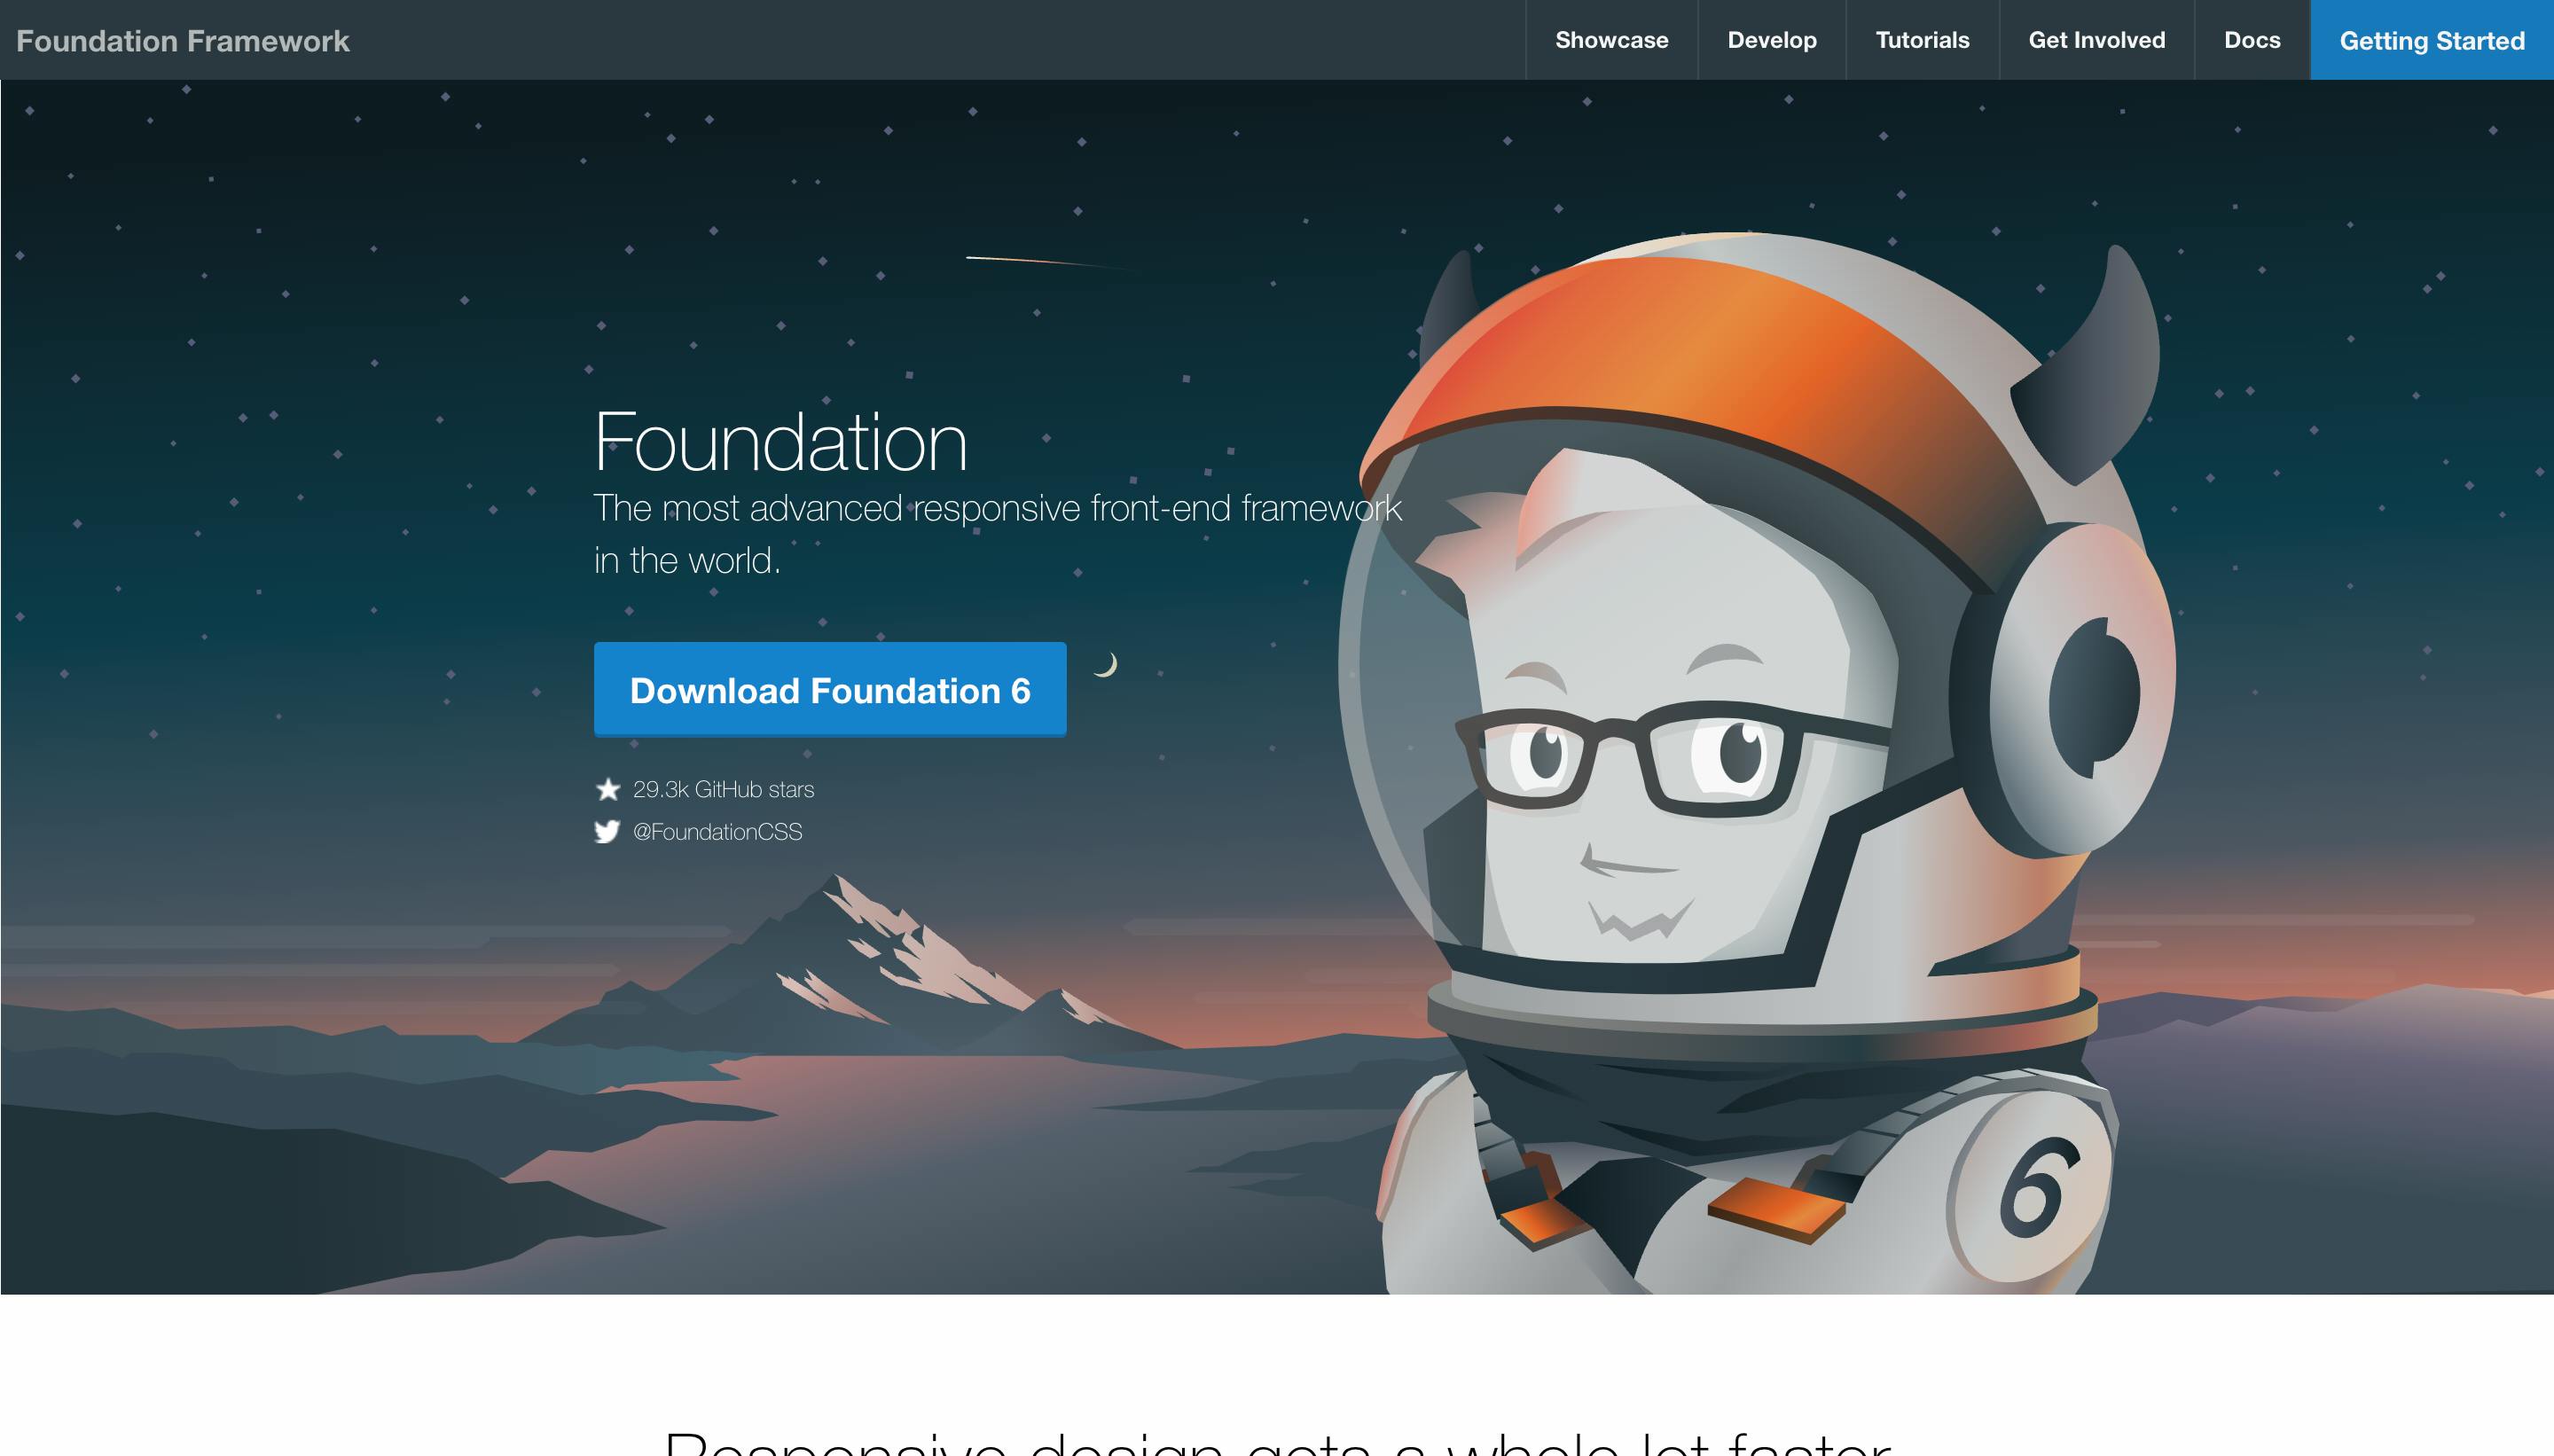 The most advanced responsive front-end framework in the world. _ Foundation.png